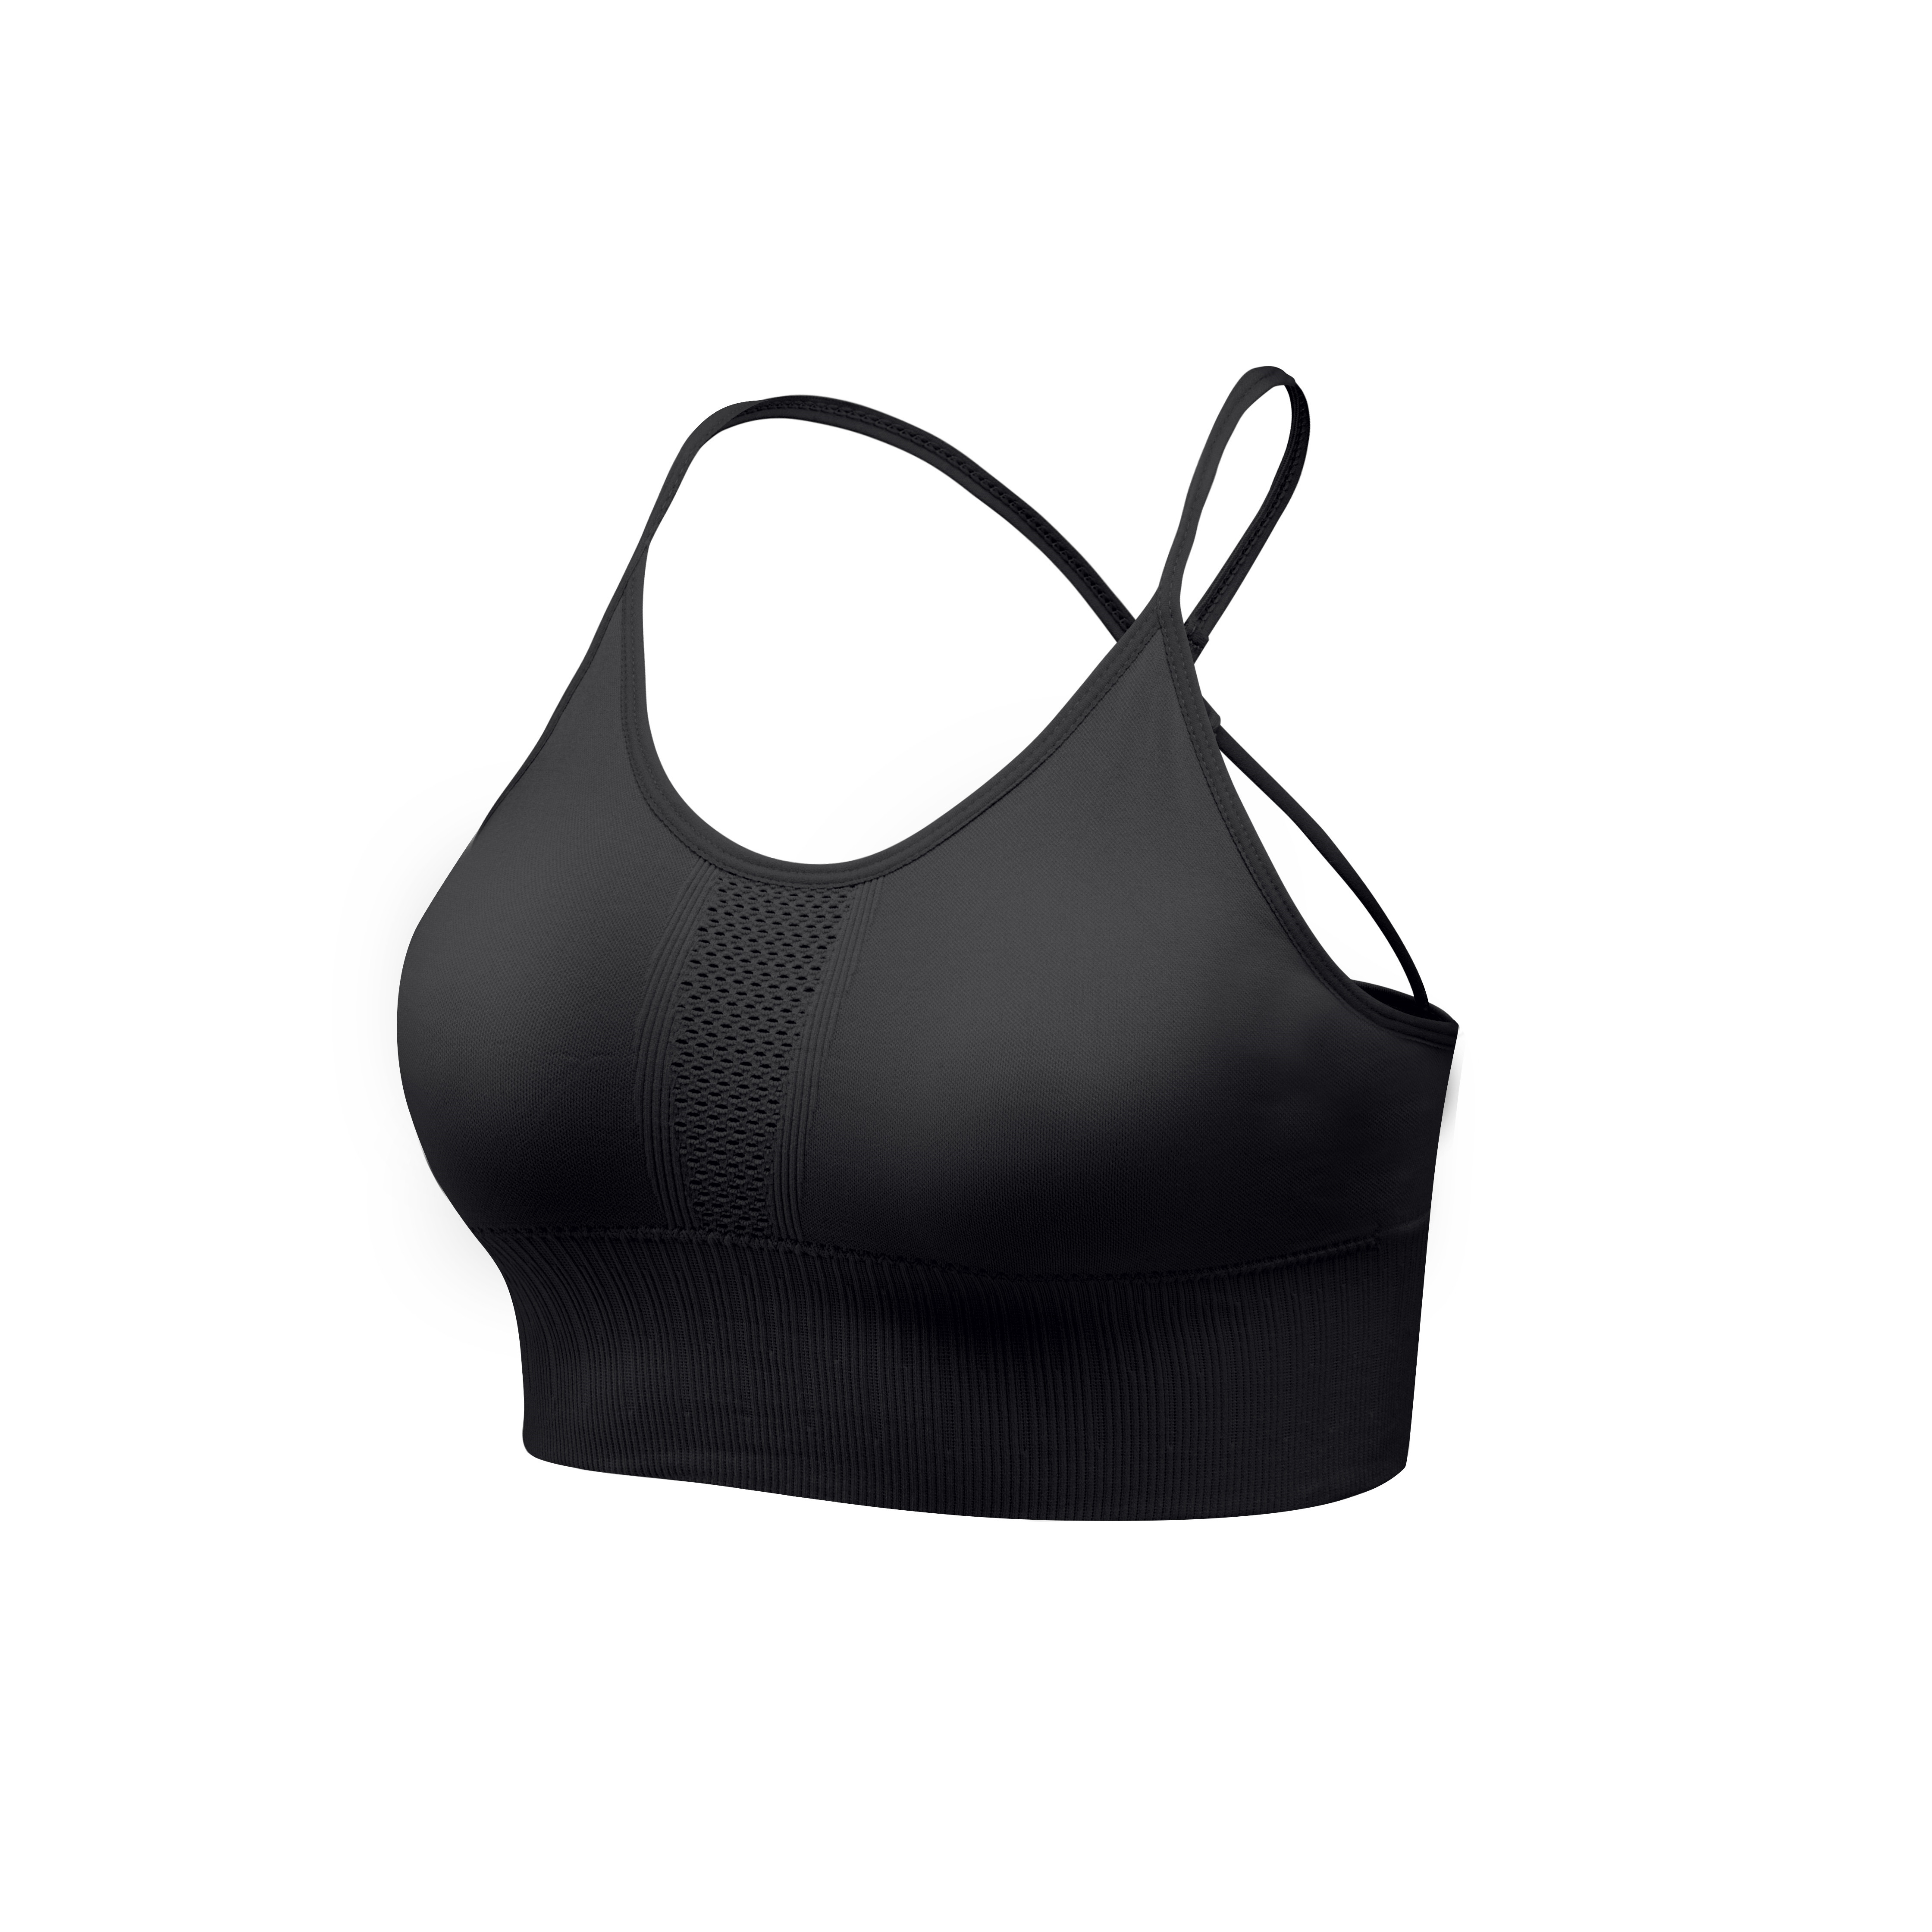 The BTTR Sports Bra - Strappy Sports Bras for Women - Criss Cross Back Sexy  Wireless Padded Yoga Bra Cute Workout (as1, Alpha, x_s, Regular, Regular,  Amethyst) at  Women's Clothing store